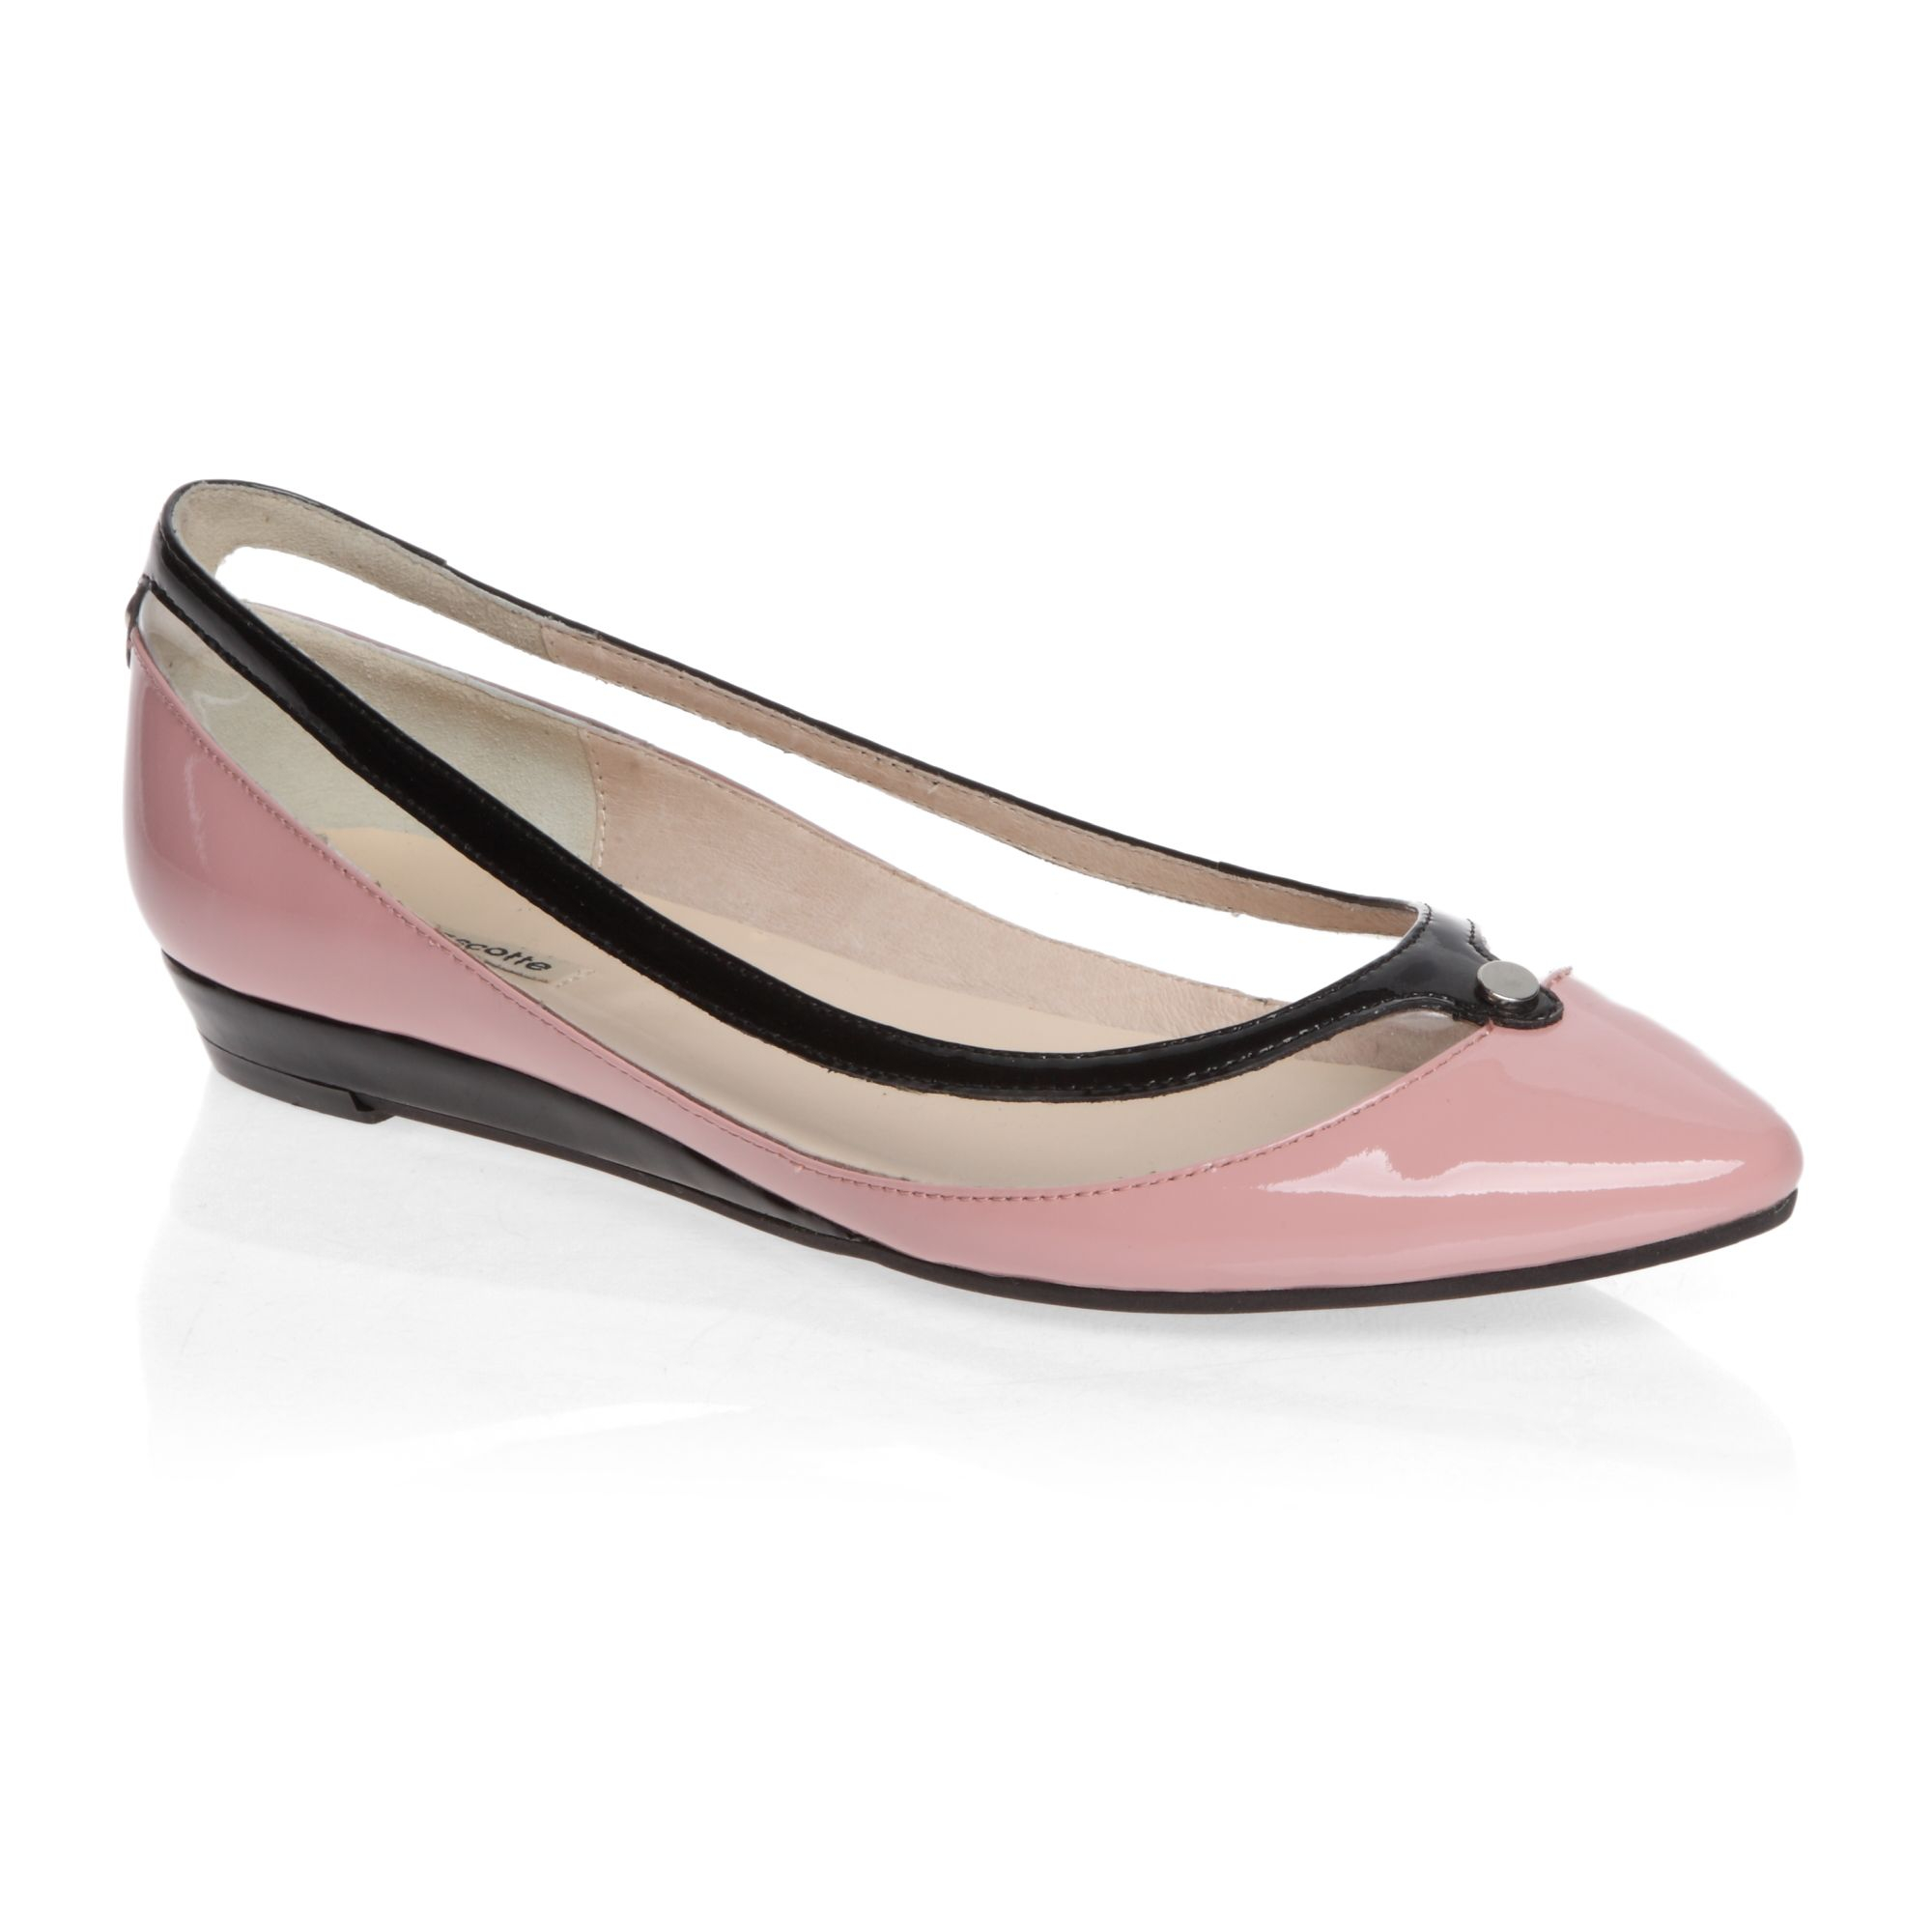 Mascotte Pointed Toe Ballerina Shoes in Pink | Lyst